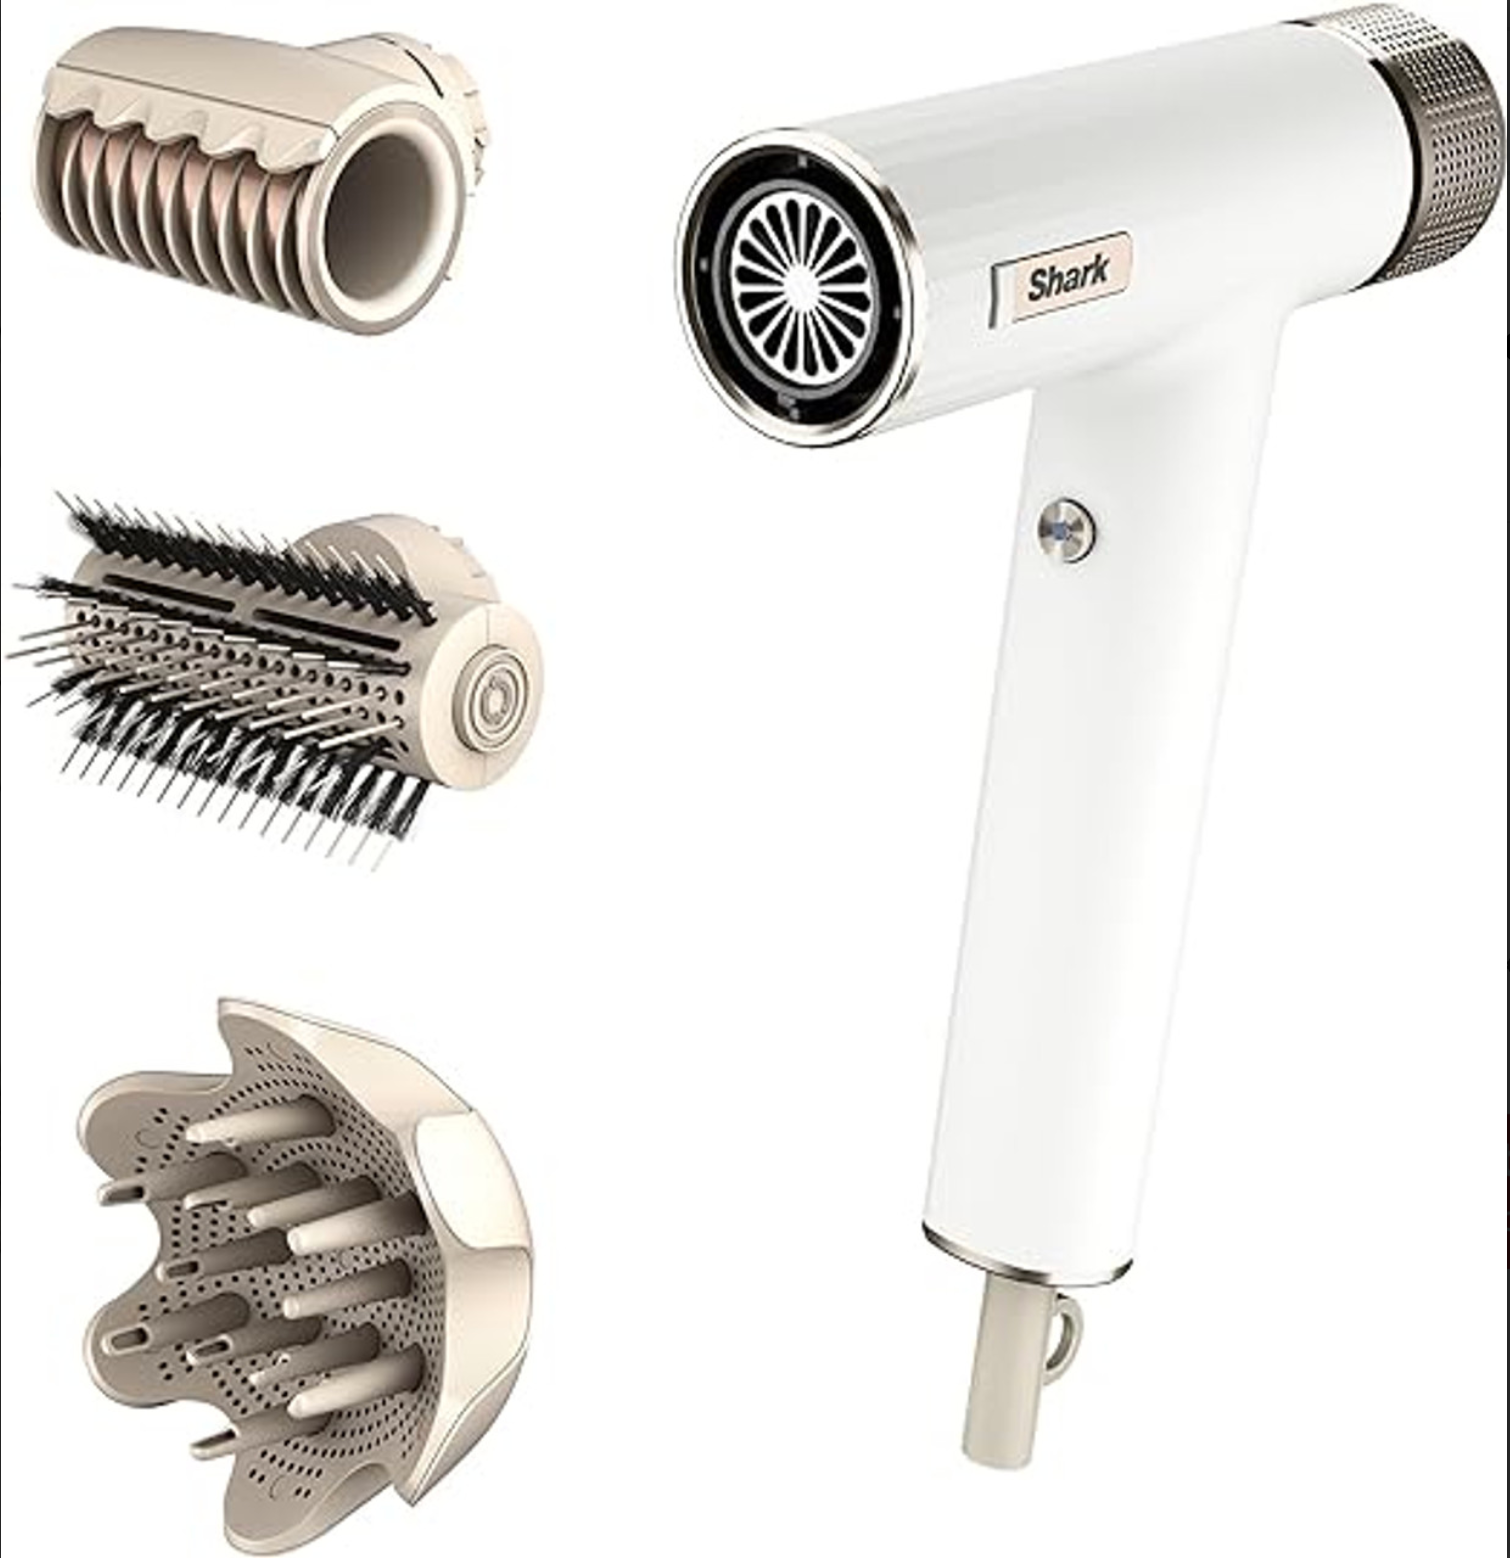 hair dryer and it's accessories